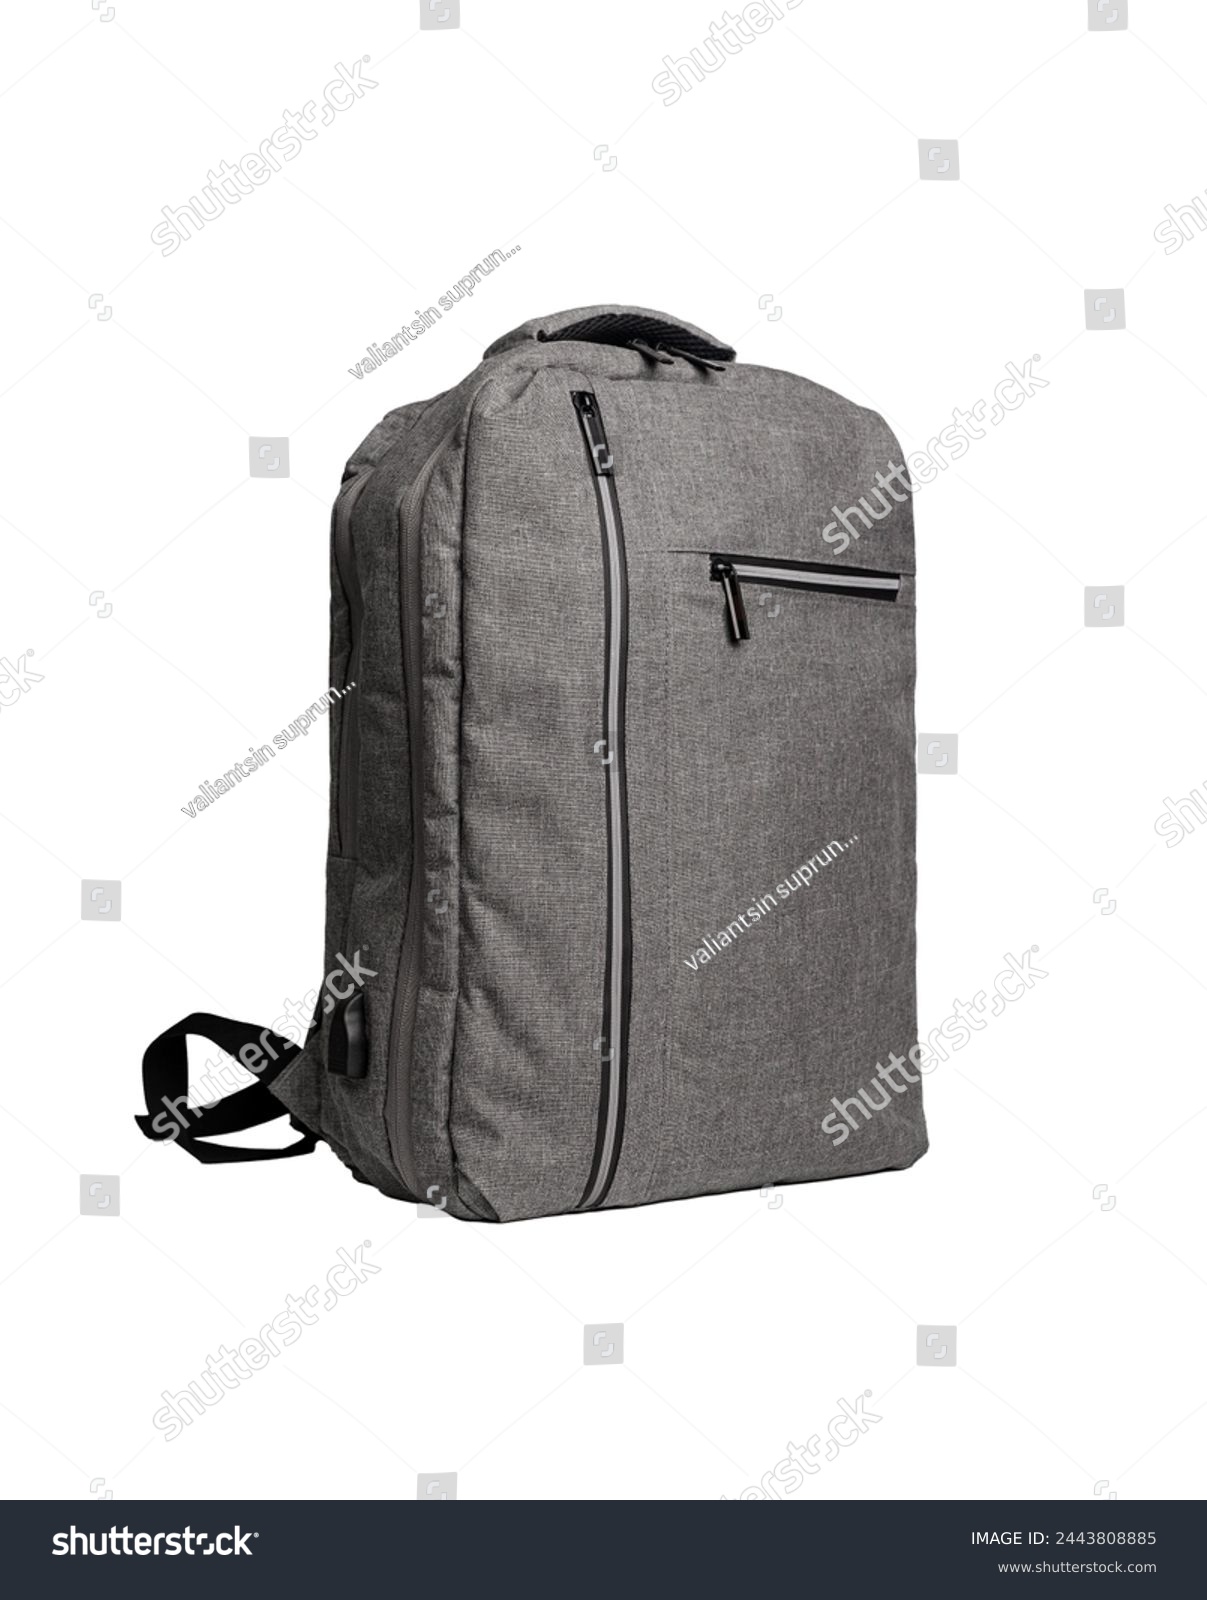 Gray backpack, school bag isolated on white background. #2443808885